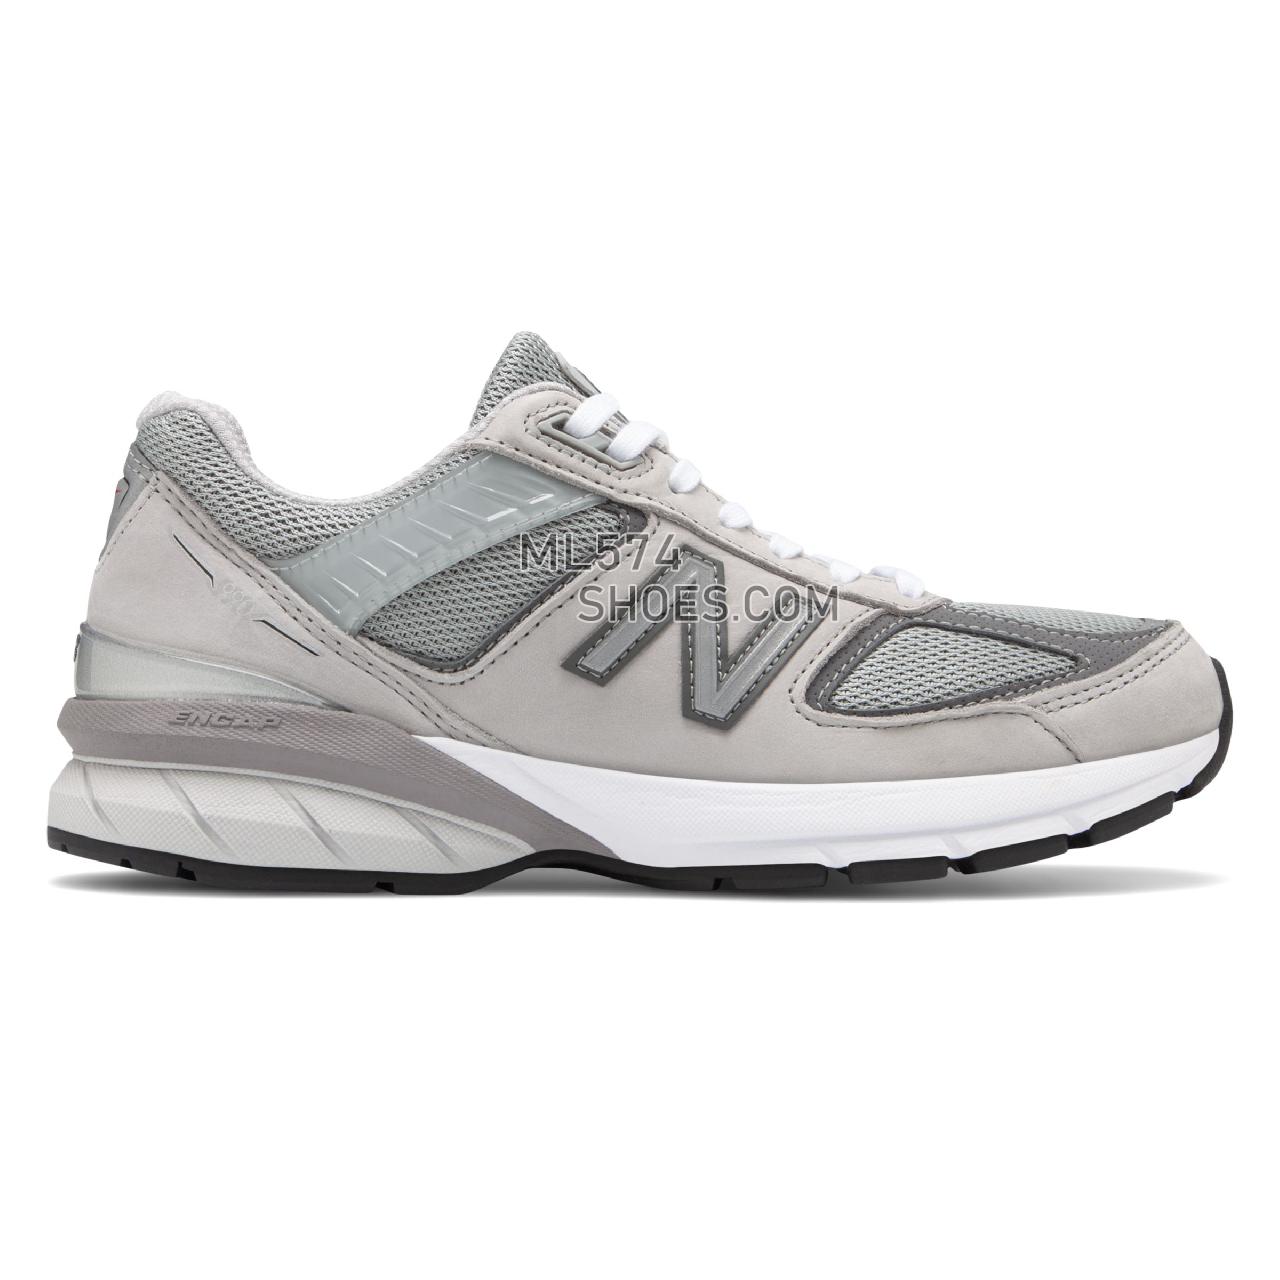 New Balance Made in US 990v5 with Nubuck - Men's Made in US 990v5 with Nubuck - Grey with Castlerock - W990IG5